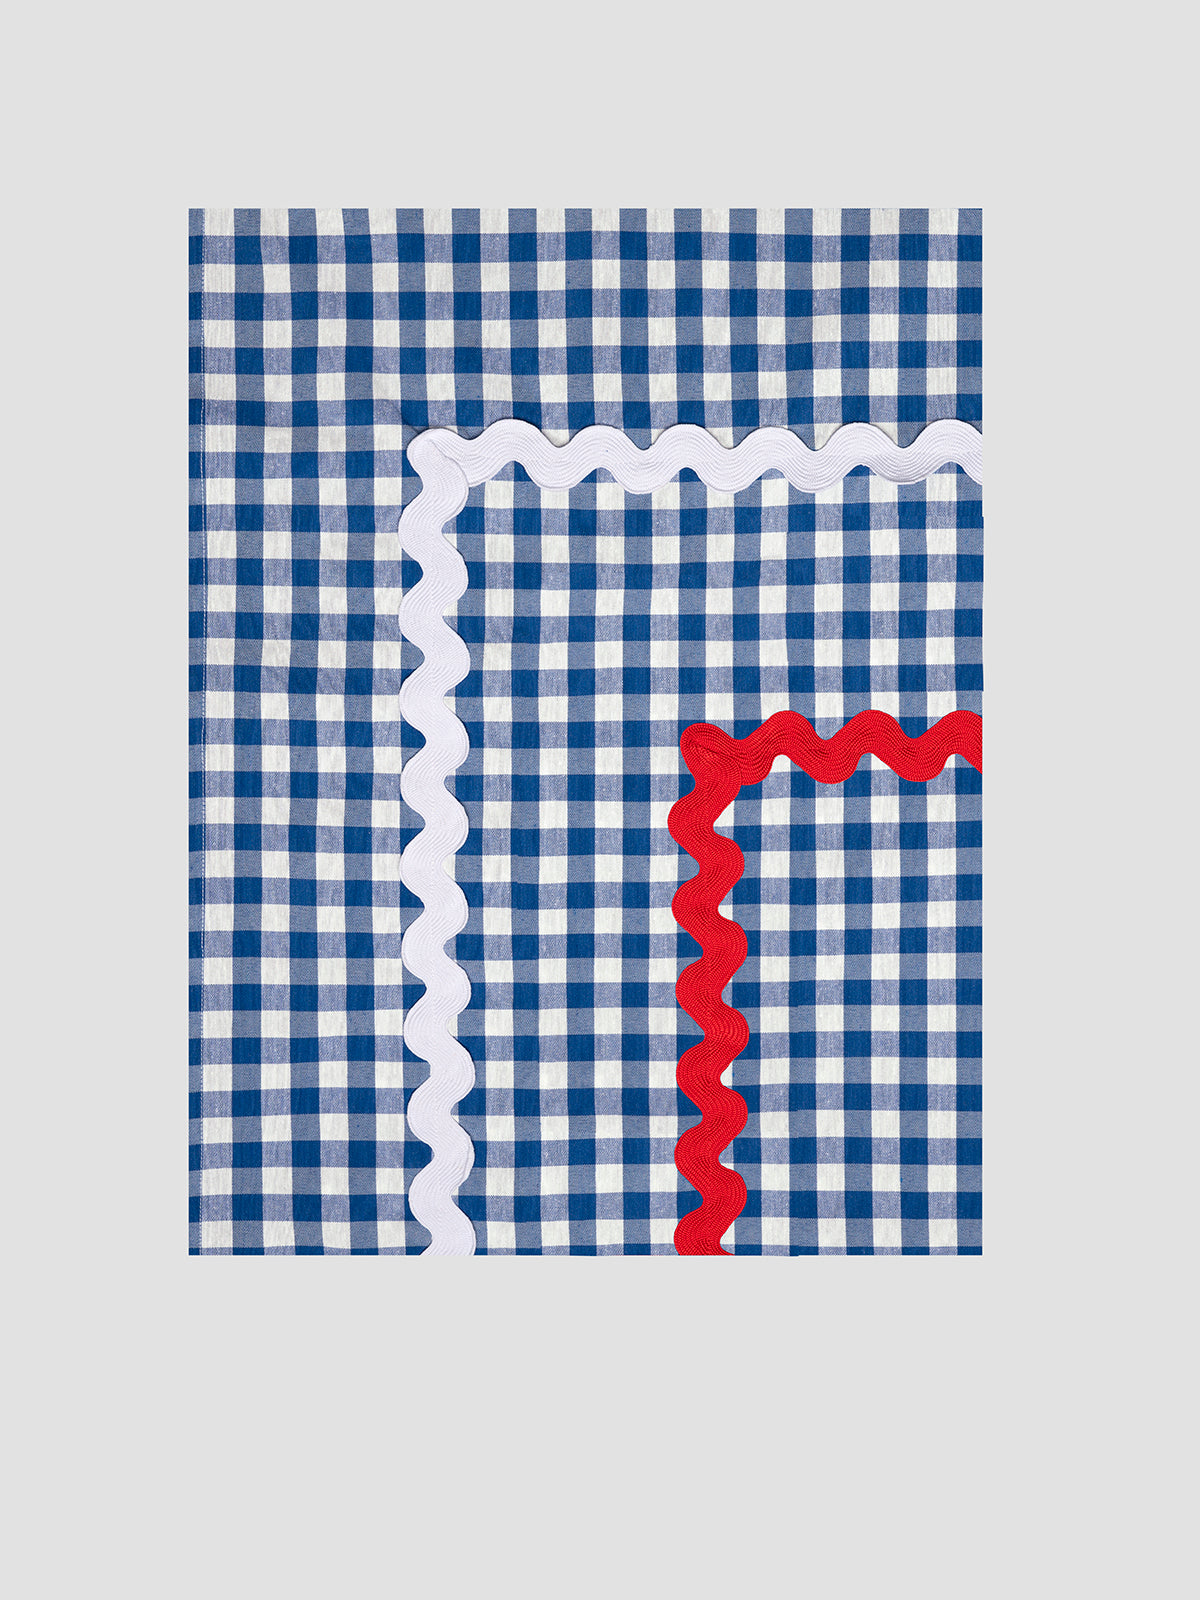 Rectangular tablecloth made of&nbsp;blue and white vichy check cotton with&nbsp;red and&nbsp;white&nbsp;trim